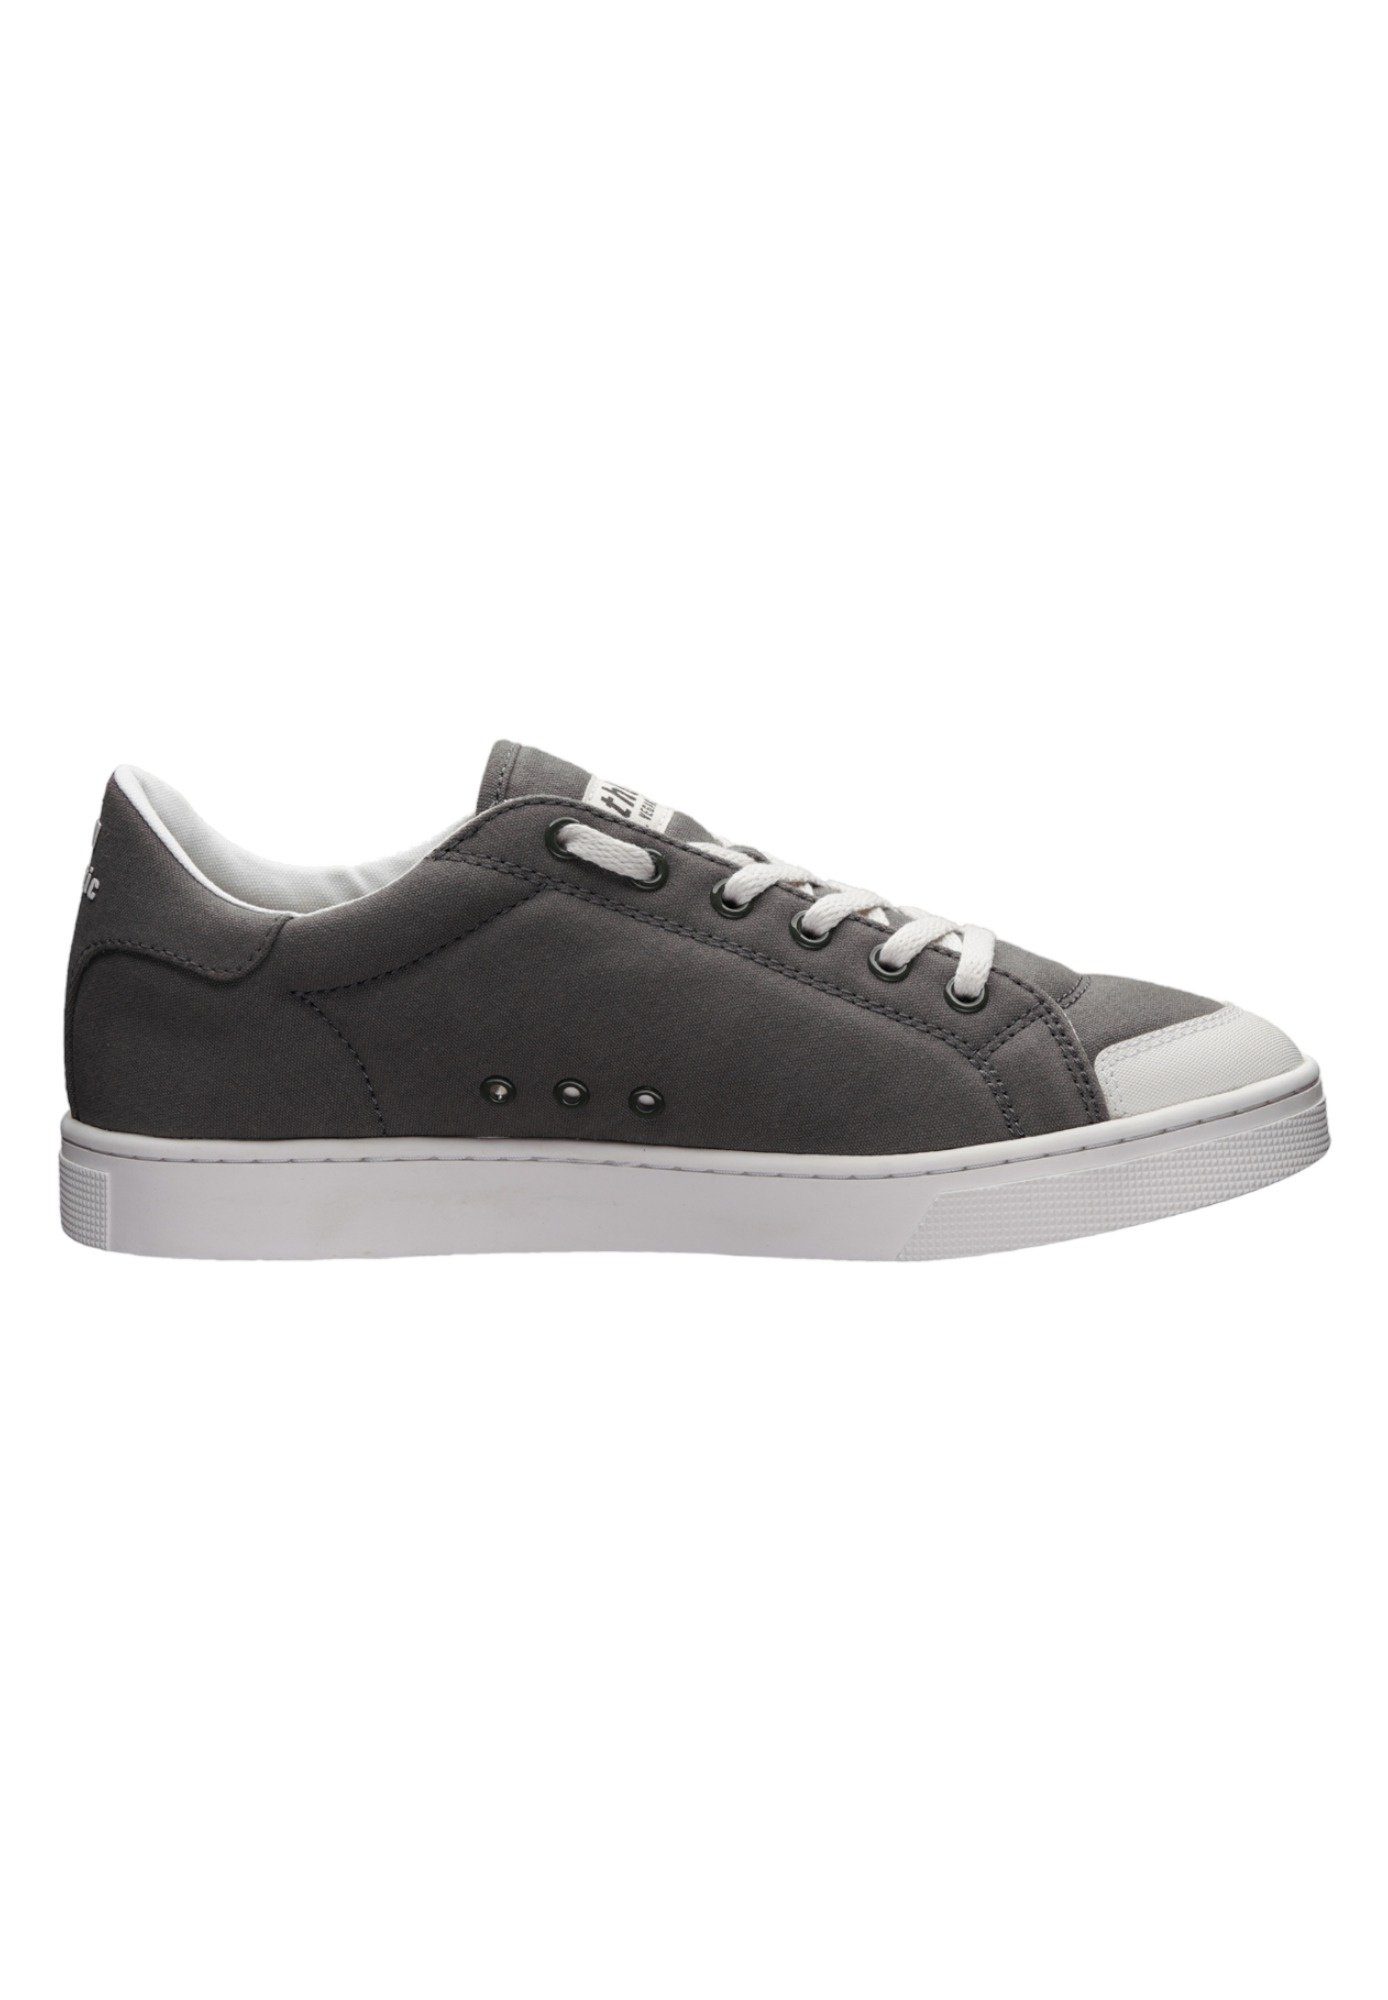 Sneaker - Fairtrade ETHLETIC White Grey Just Lo Cut Active Produkt Donkey